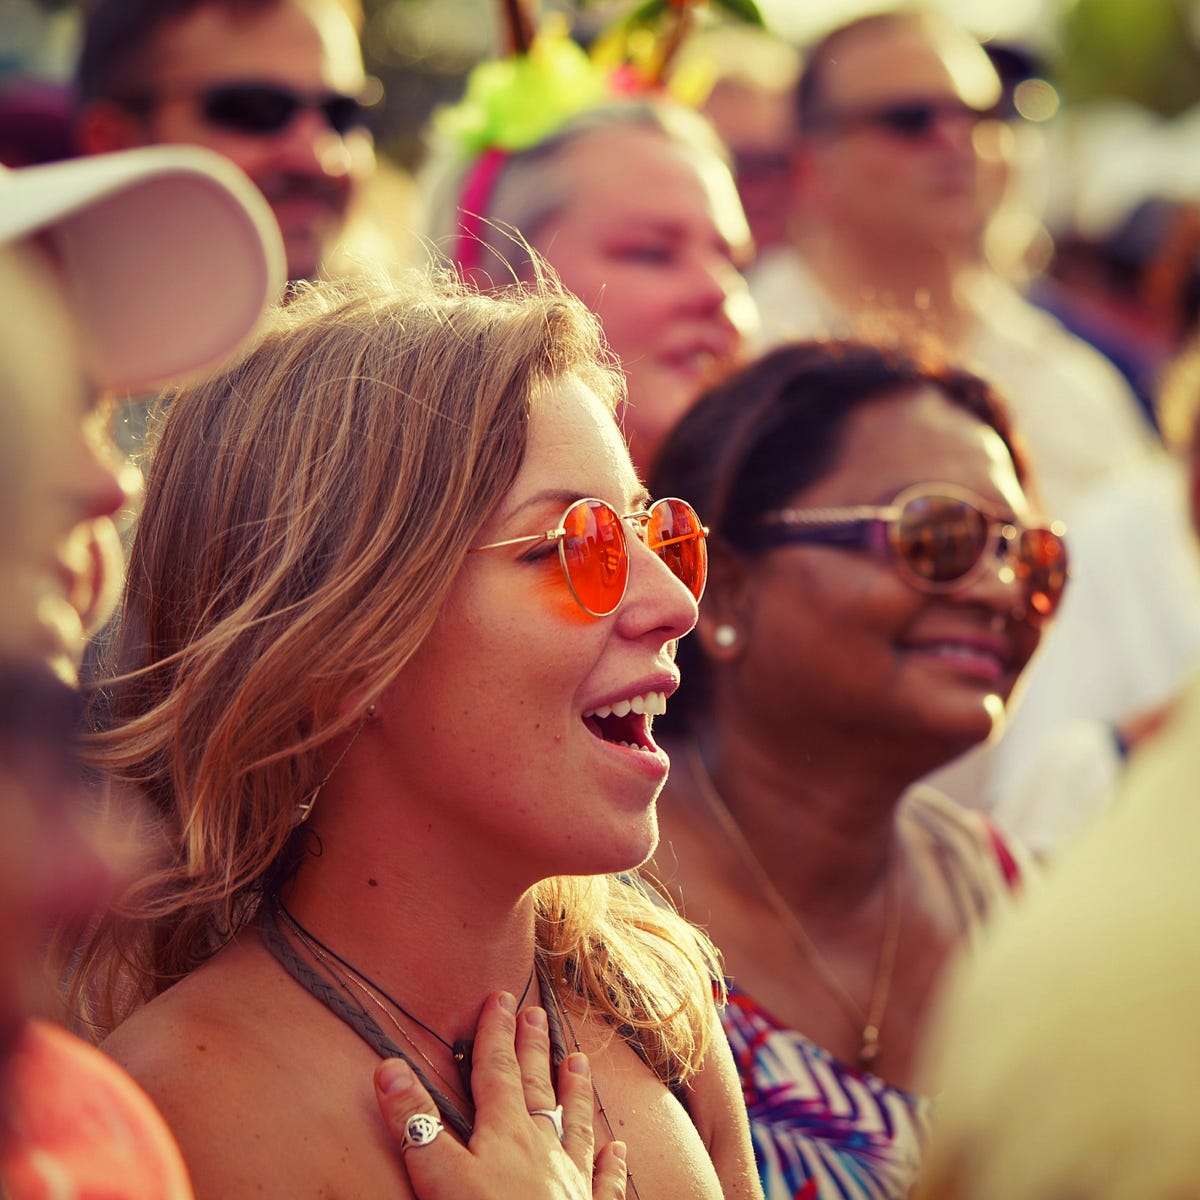 8 Sex Festivals That Should Be On Your Bucket List By Ash Jurberg